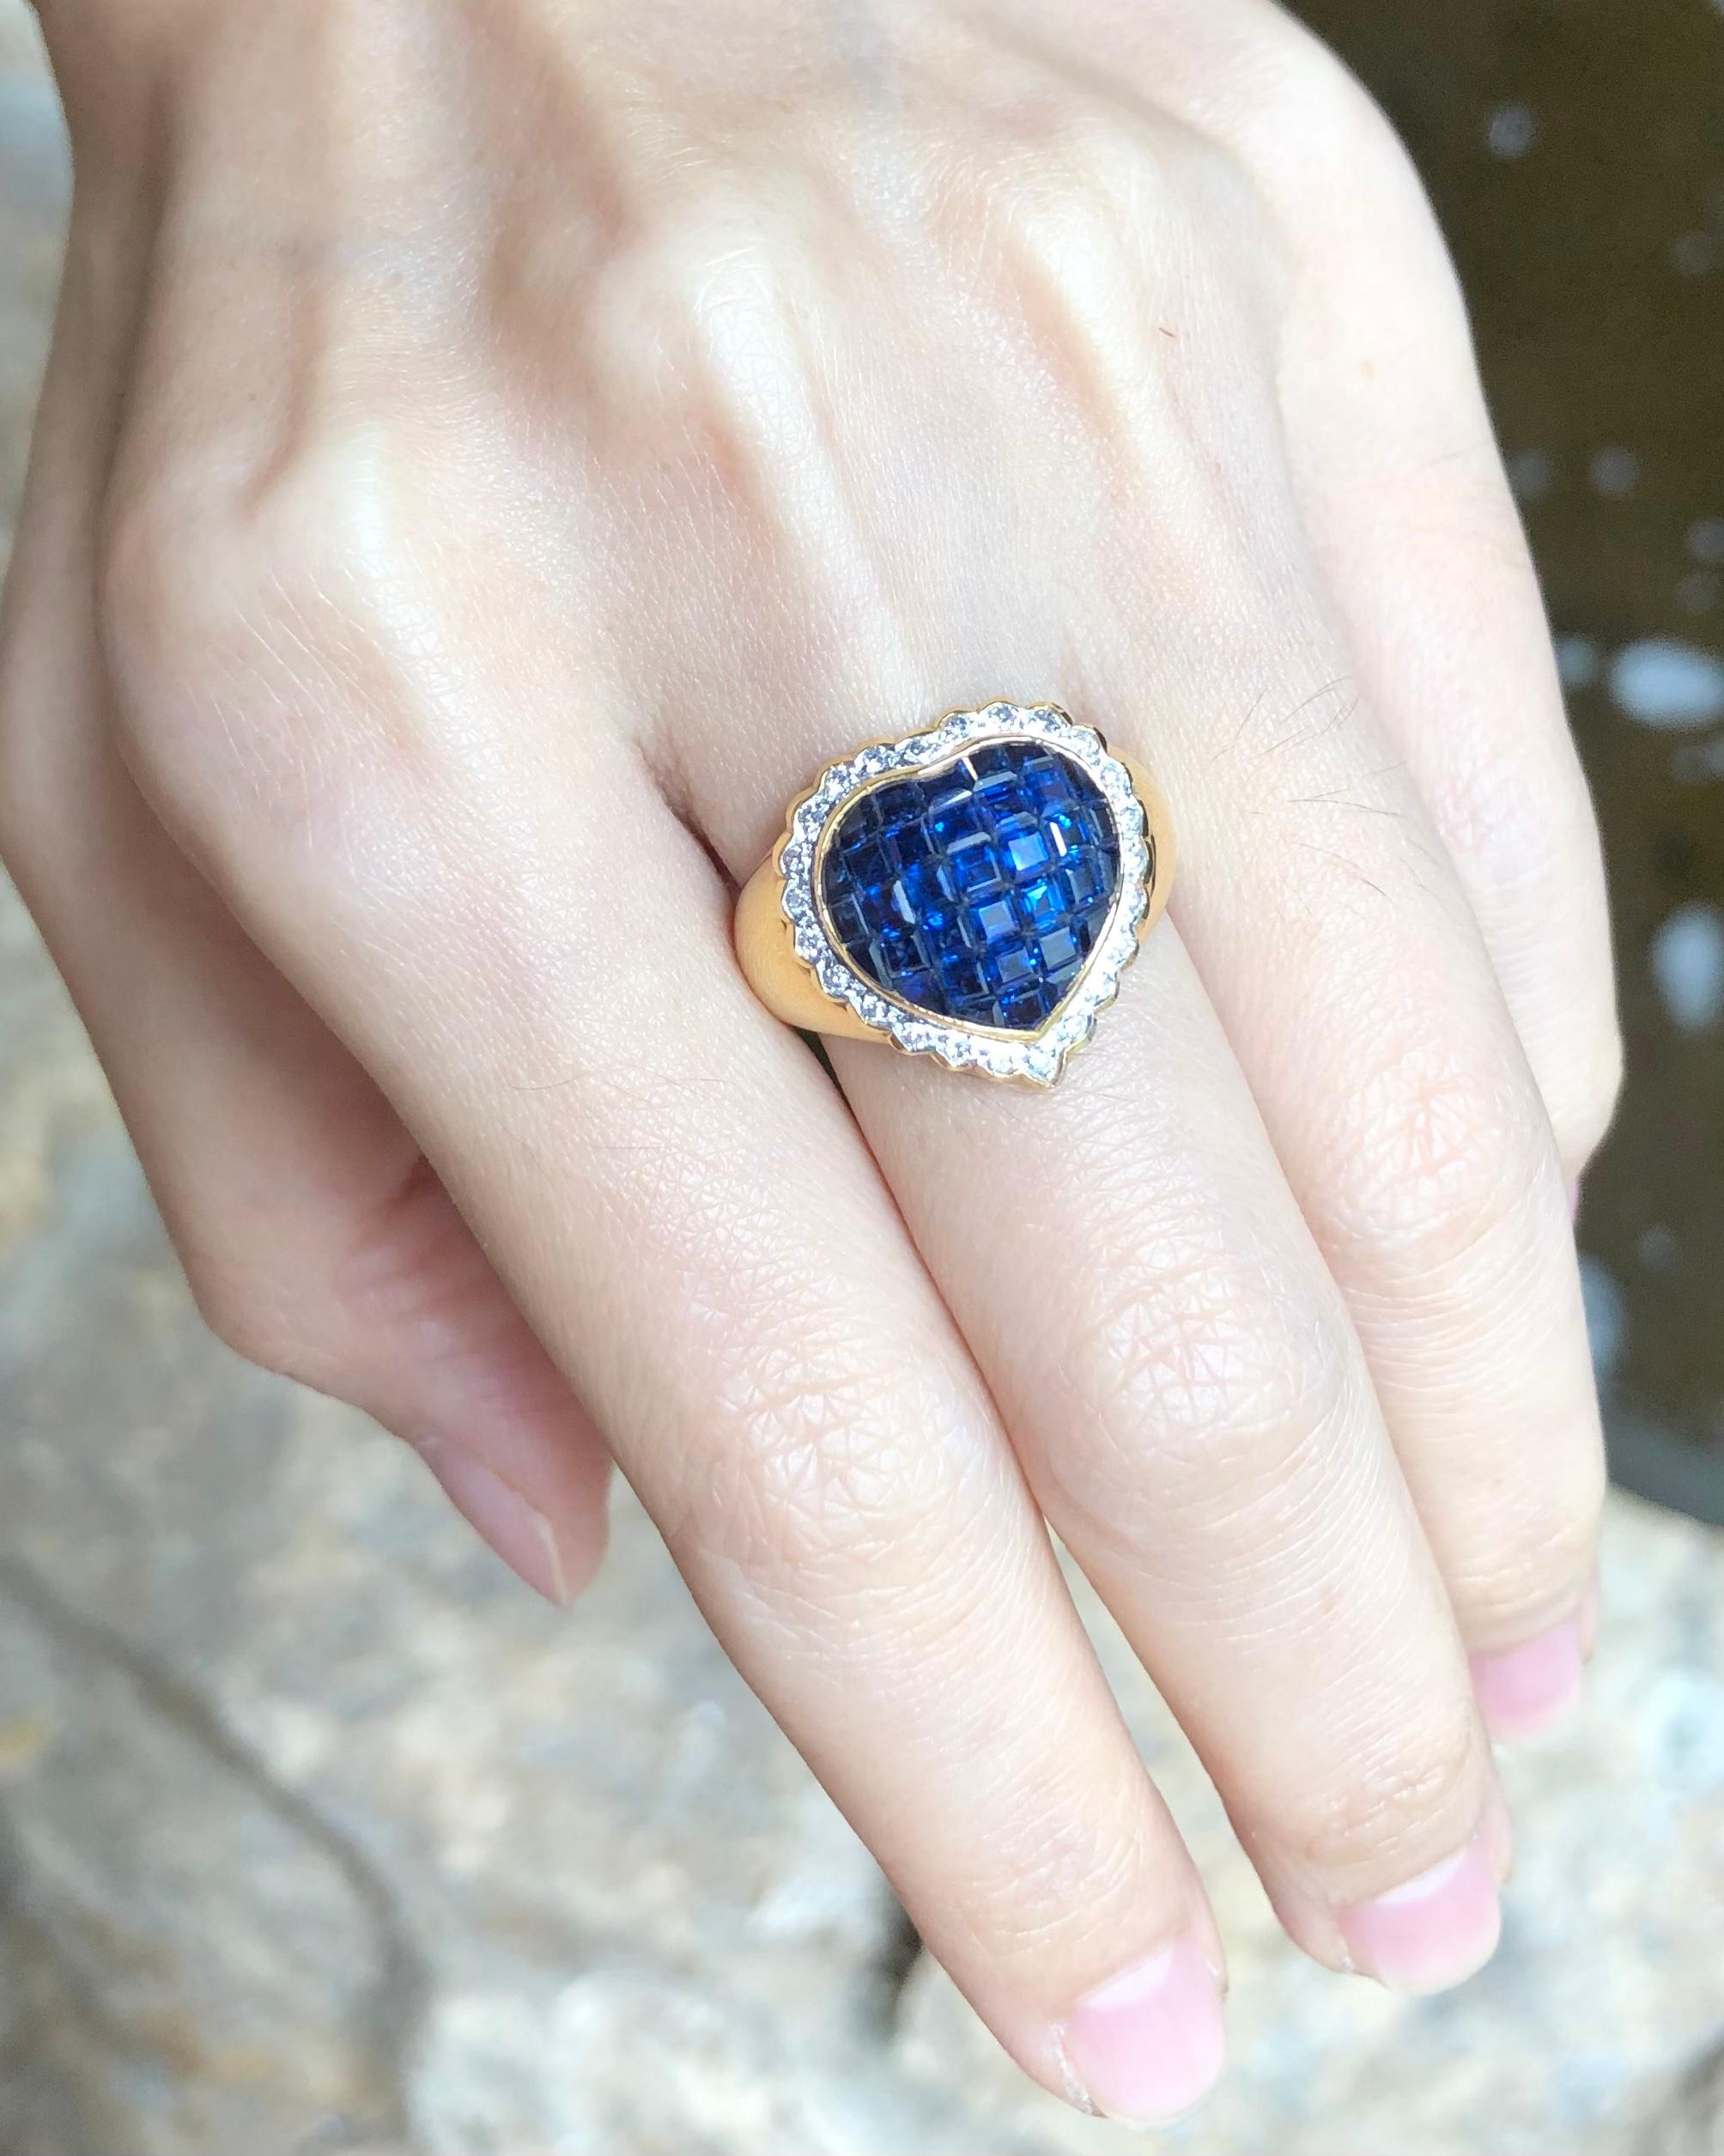 Blue Sapphire 3.32 carats with Diamond 0.21 carat Ring set in 18 Karat Gold Settings

Width:  1.5 cm 
Length: 1.7 cm
Ring Size: 54
Total Weight: 7.57 grams


